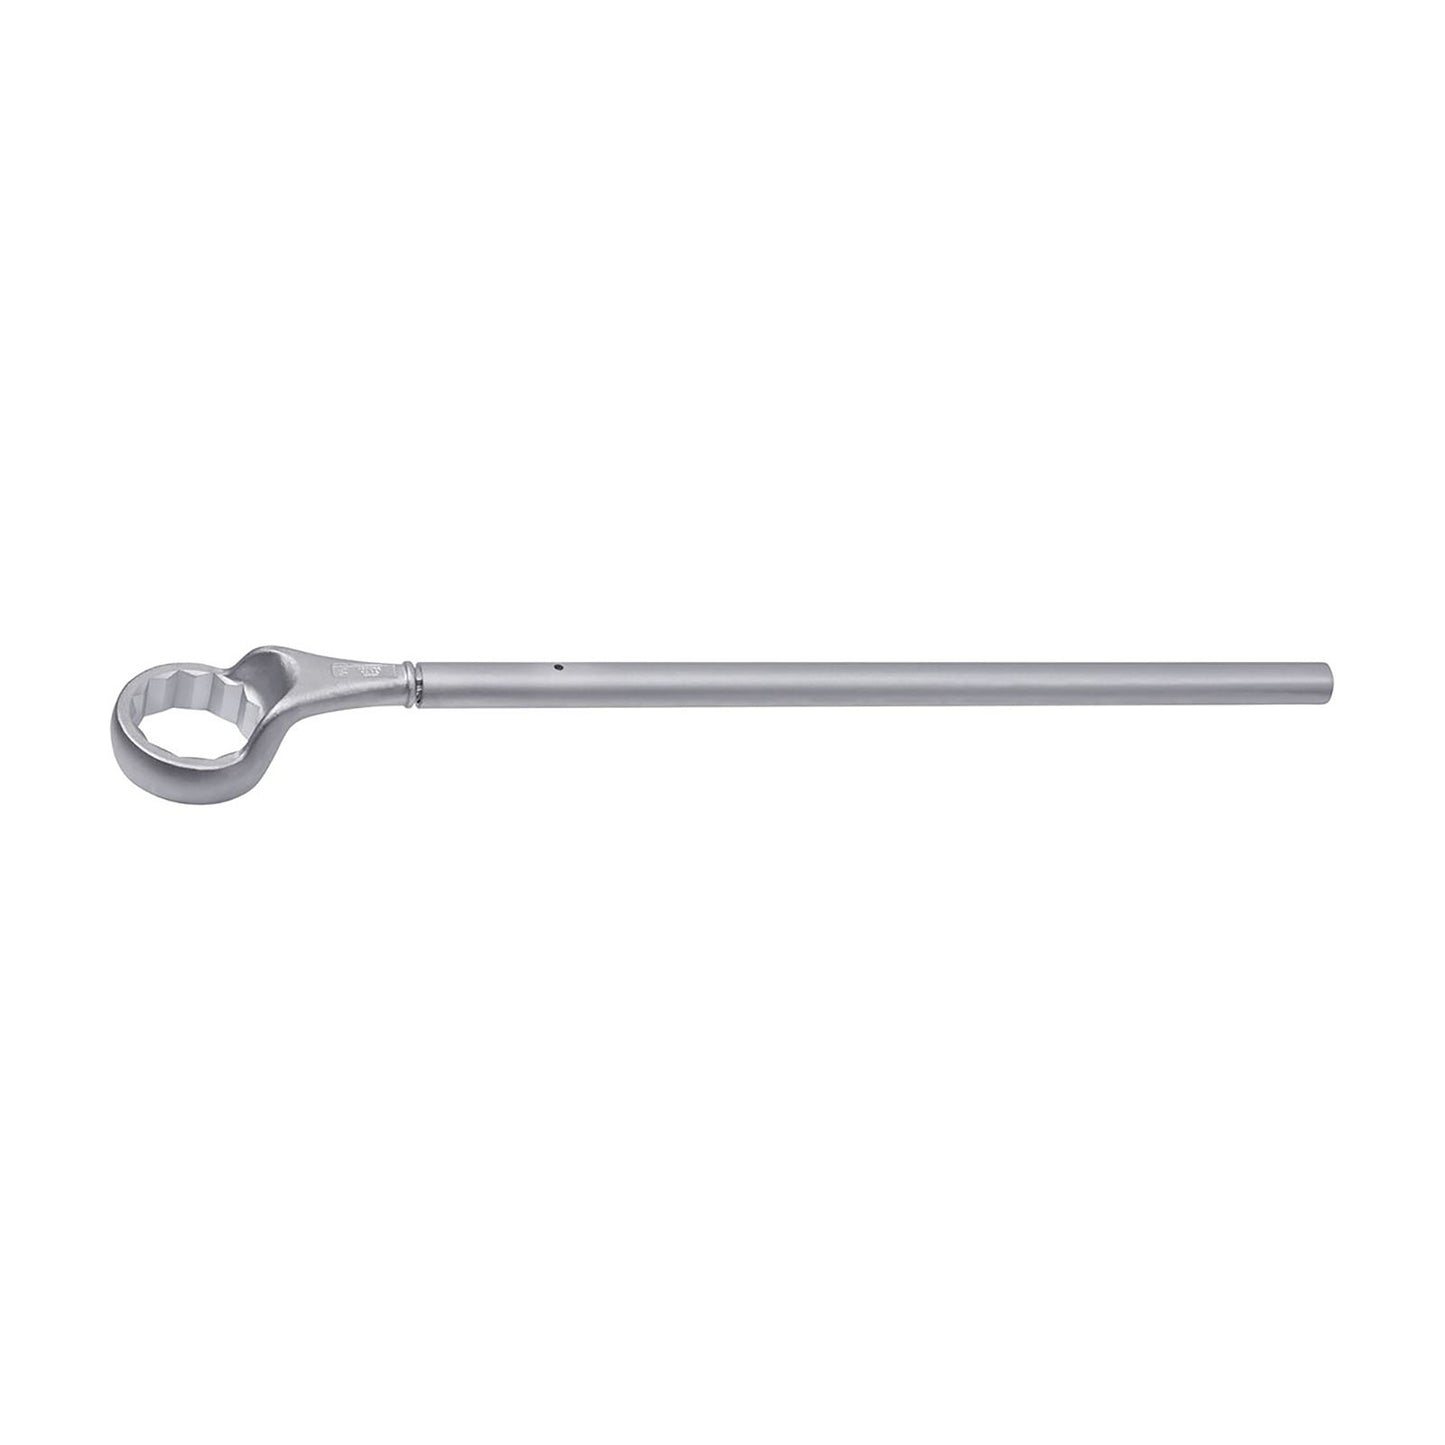 GEDORE 2 A 85 - Traction Wrench, 85mm (6035460)